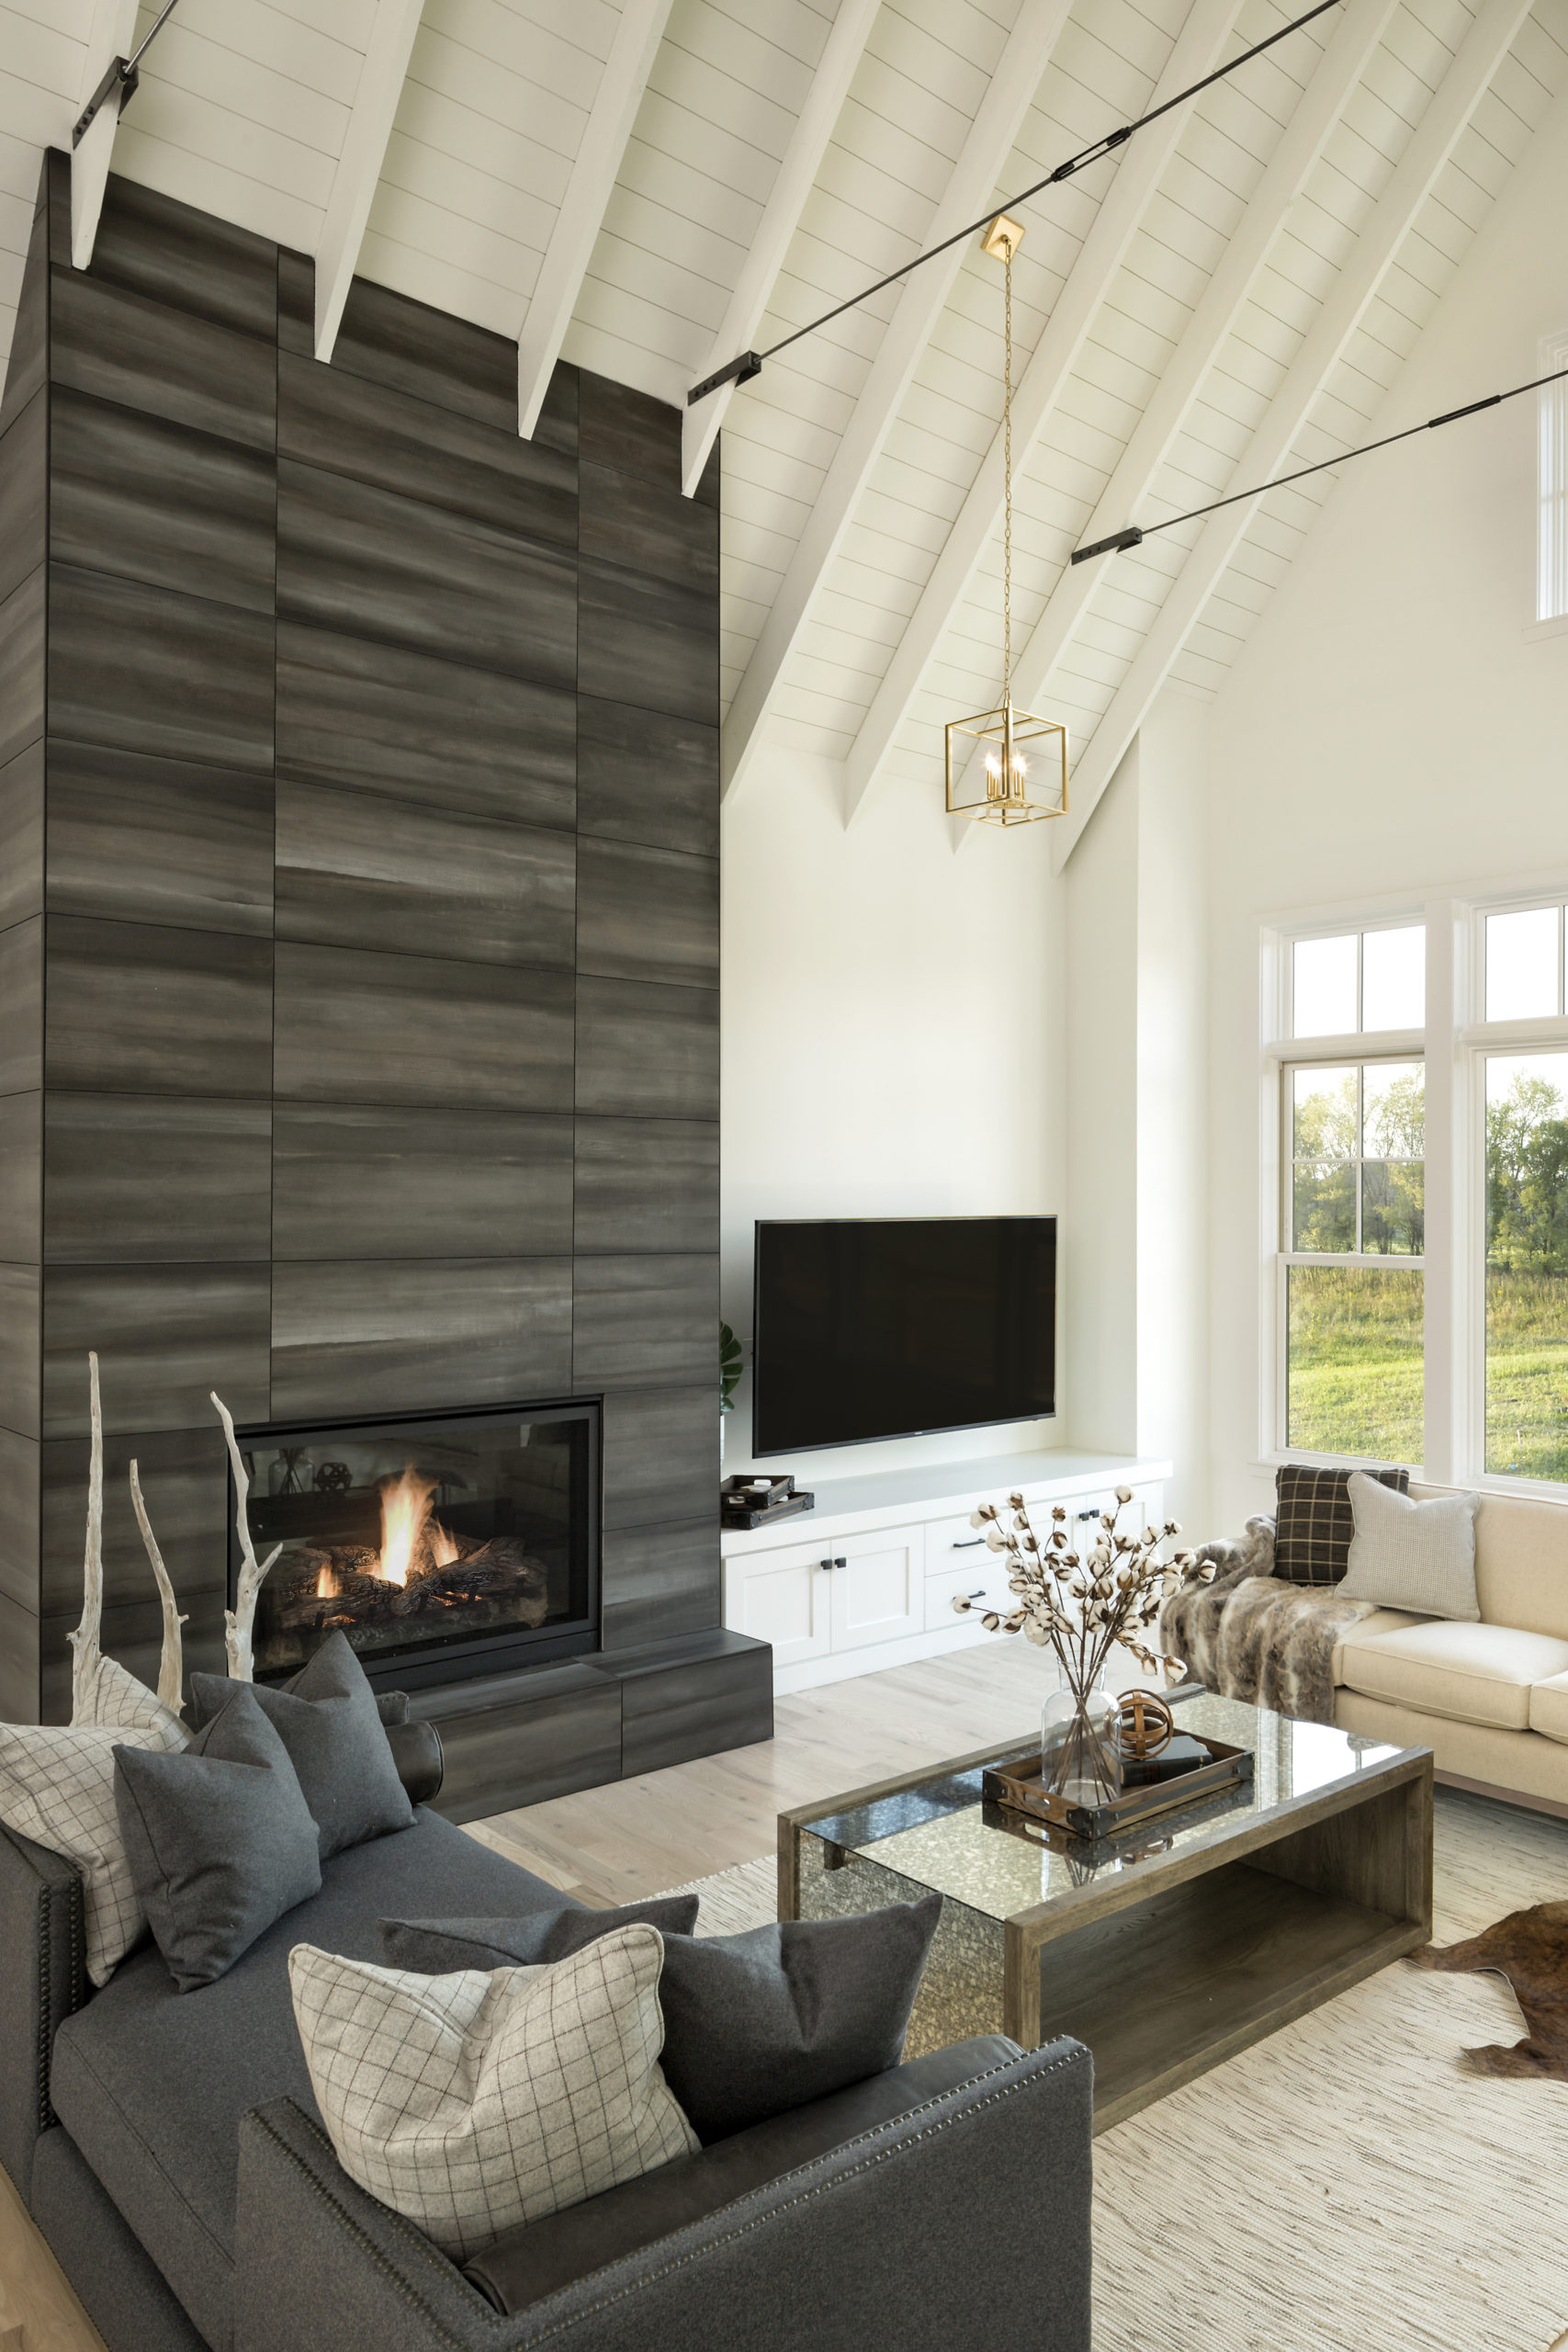 A modern living room with a fireplace and wood beams.